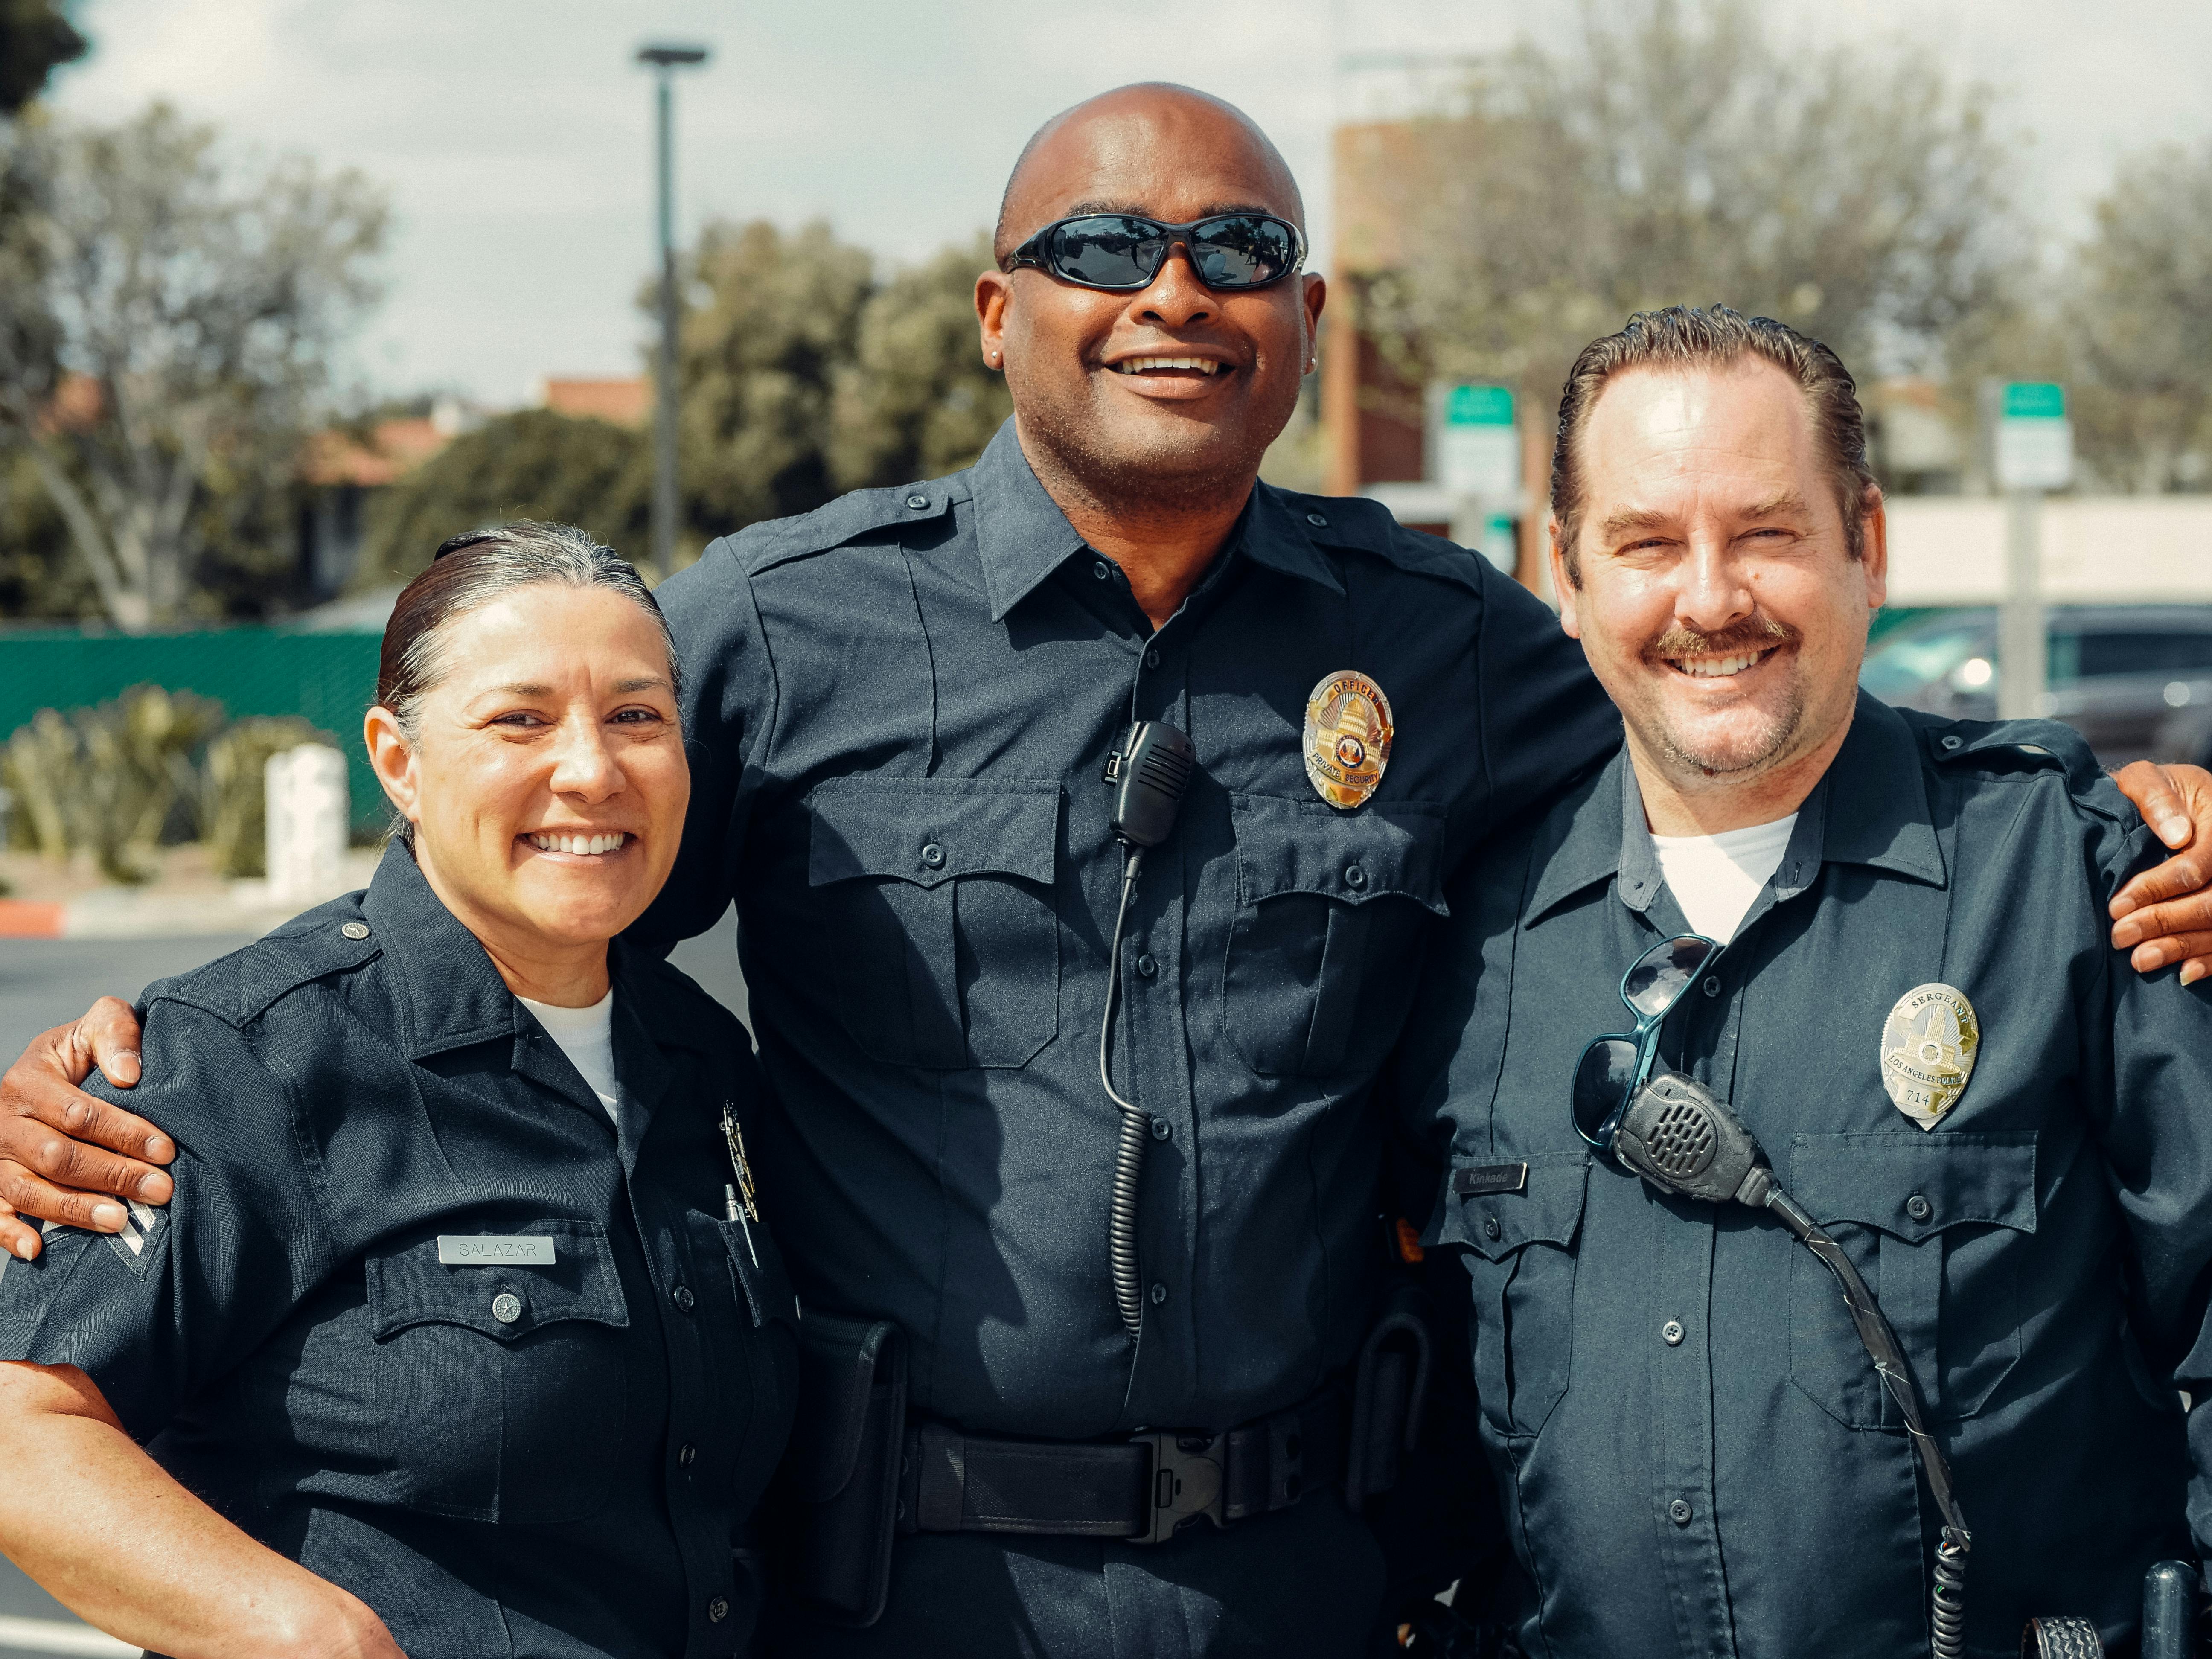 Three police officers posing together | Source: Pexels